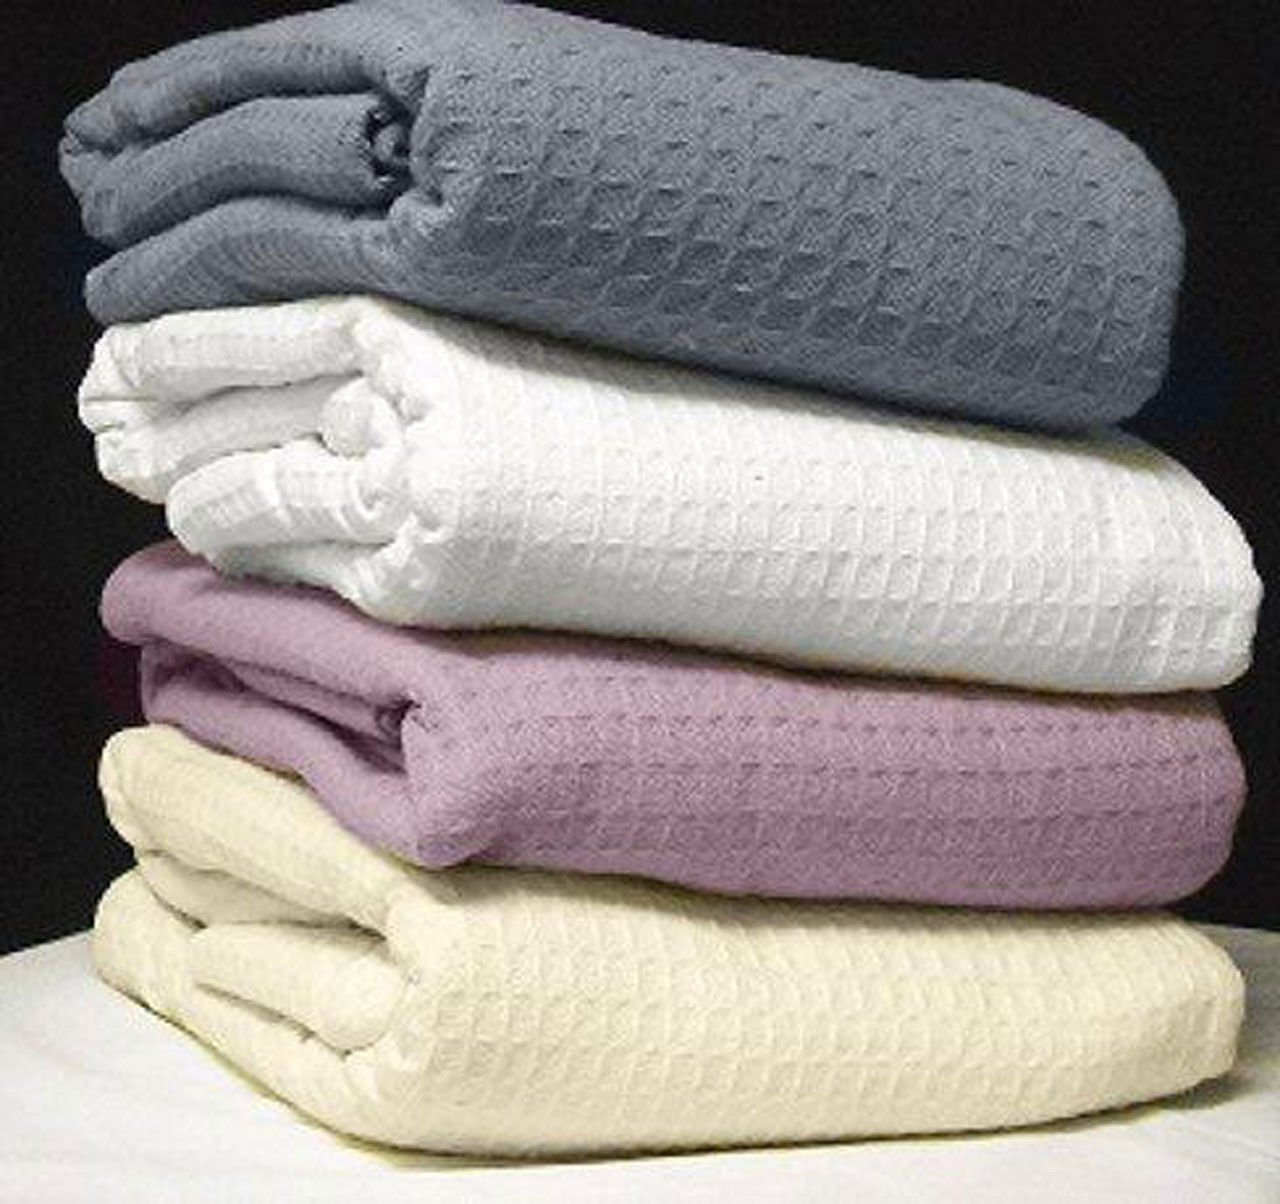 How would you describe the feel of the Santa Clarita blanket from the Santa Clara Cotton Thermal series?